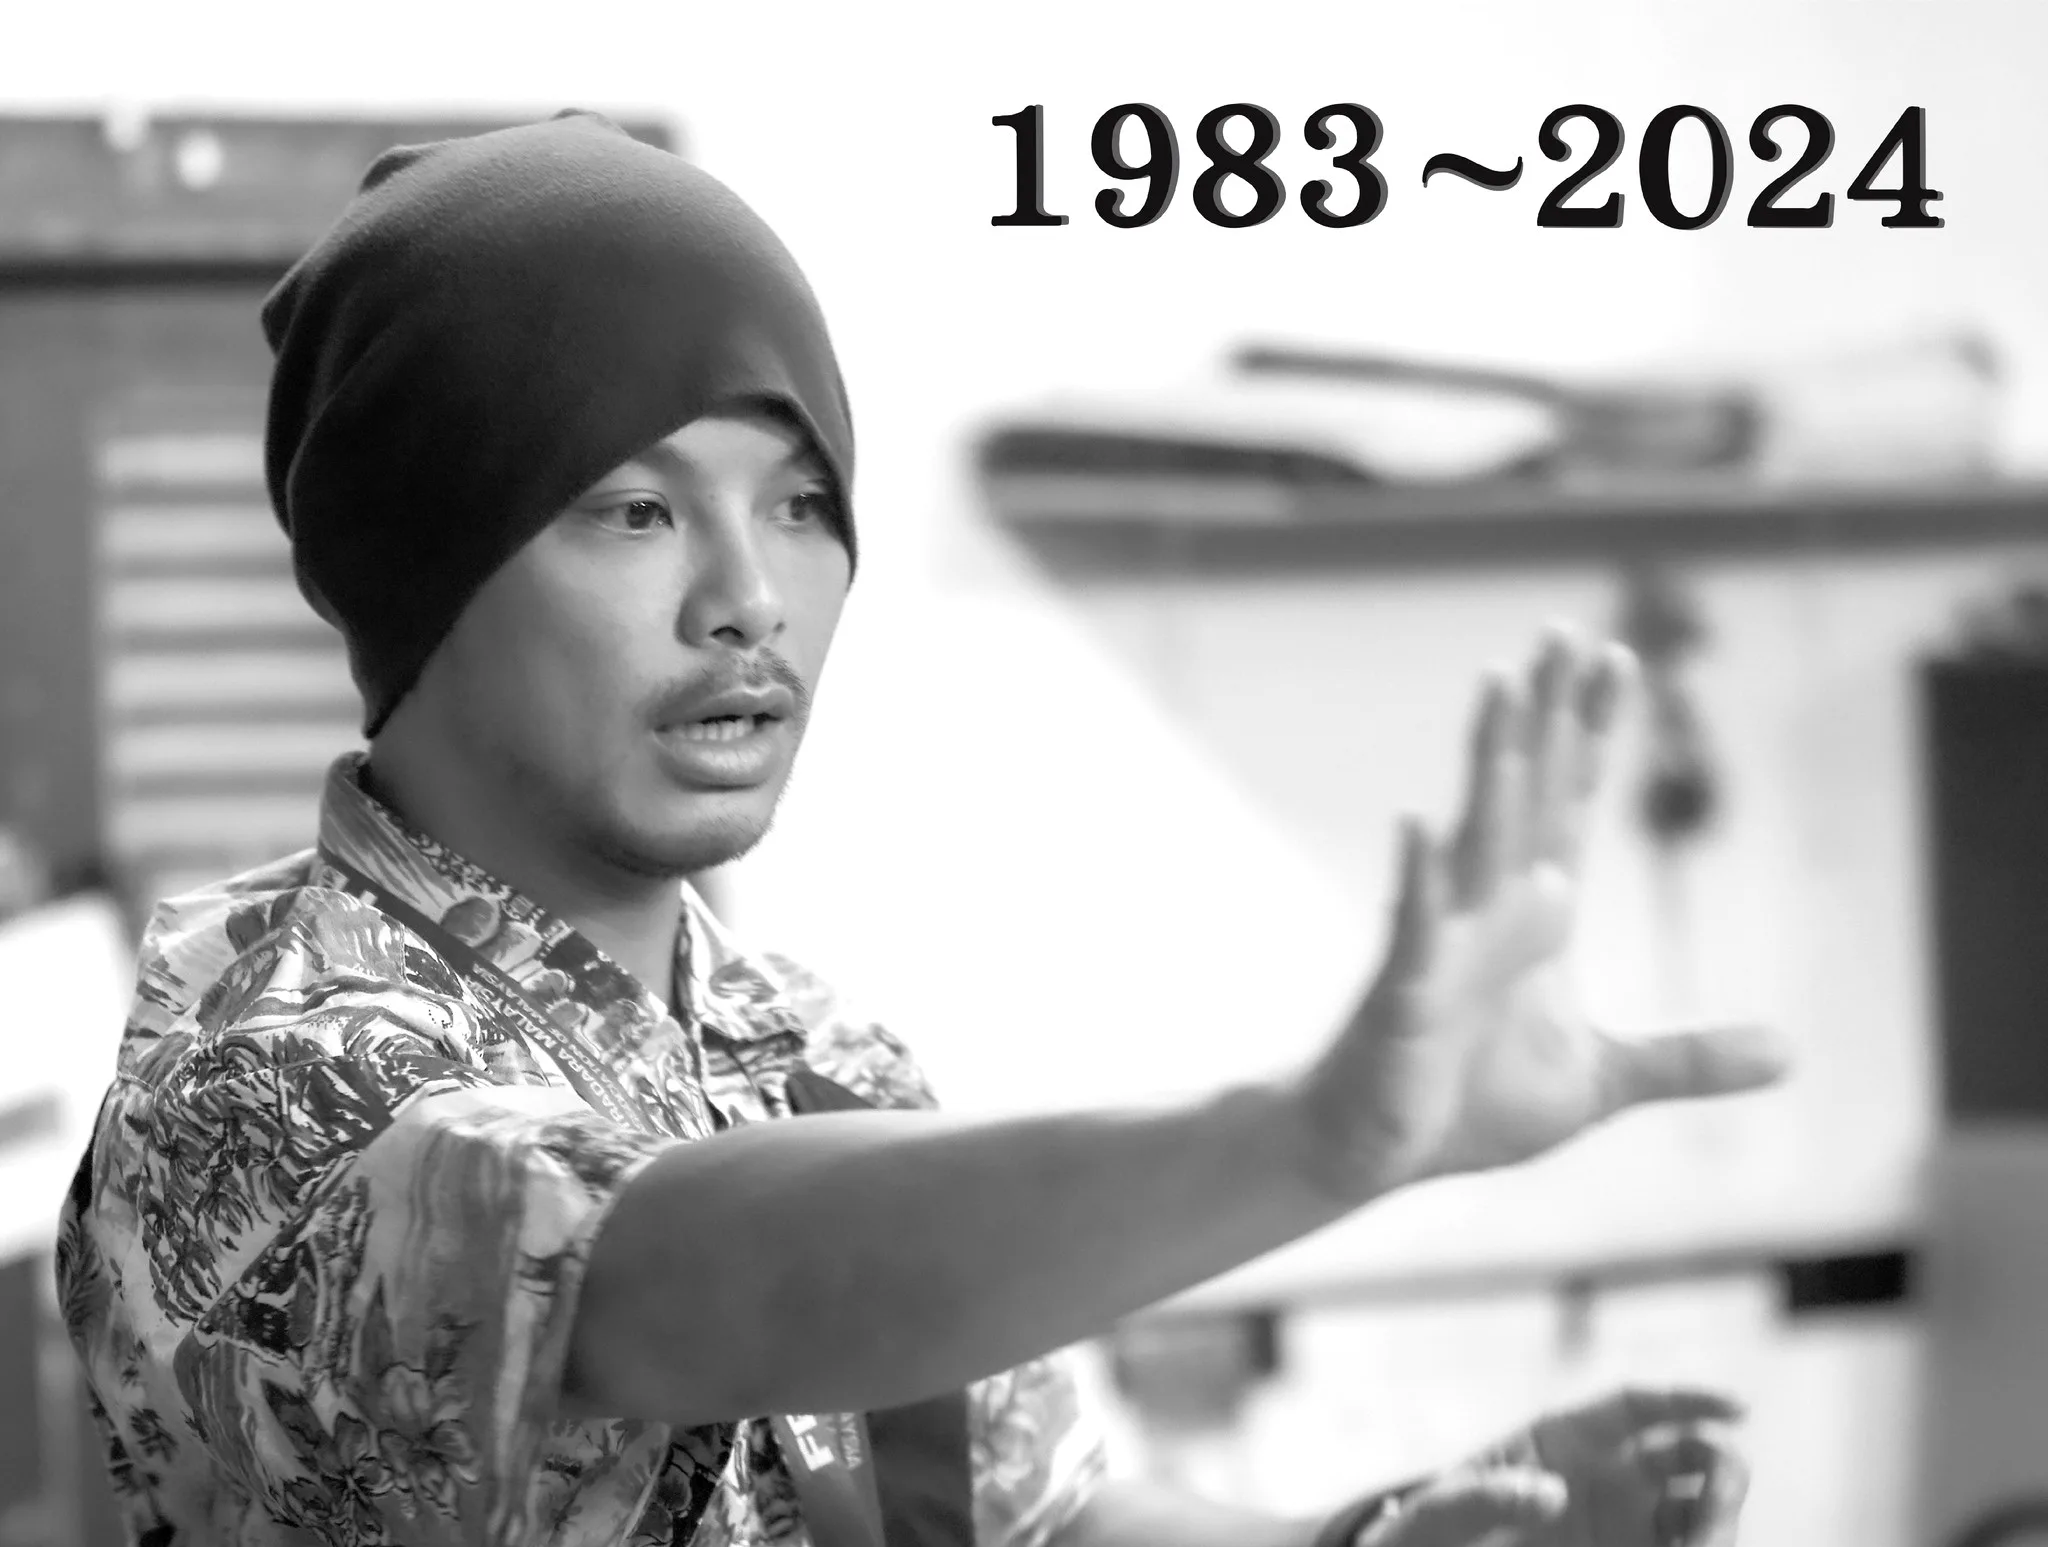 Rapper Namewee fakes death, stages elaborate funeral as April Fool's marketing stunt. Fans pay tribute before realizing it was a hoax.